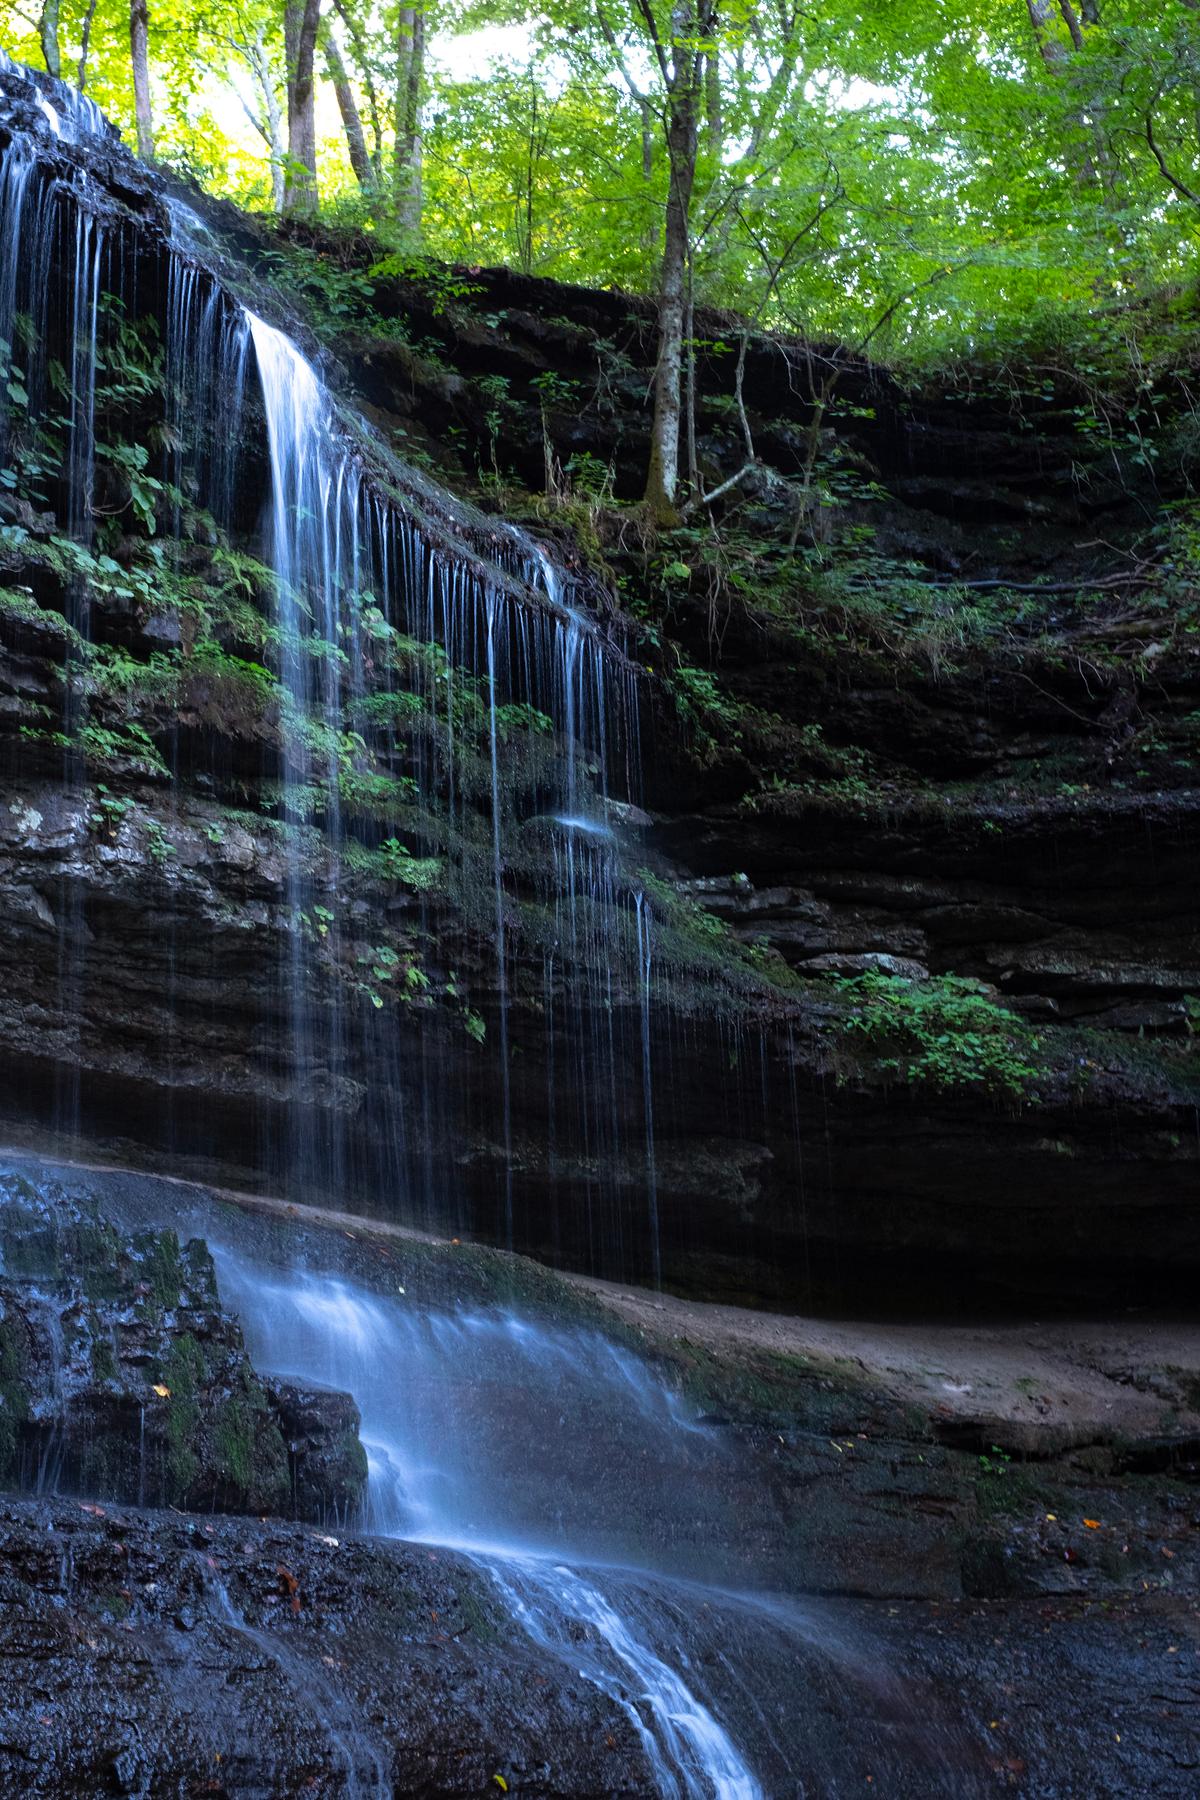 Stillhouse Hollow Falls is just one of many hikes in Columbia, Tennessee. (Benjamin Myers/TNS)